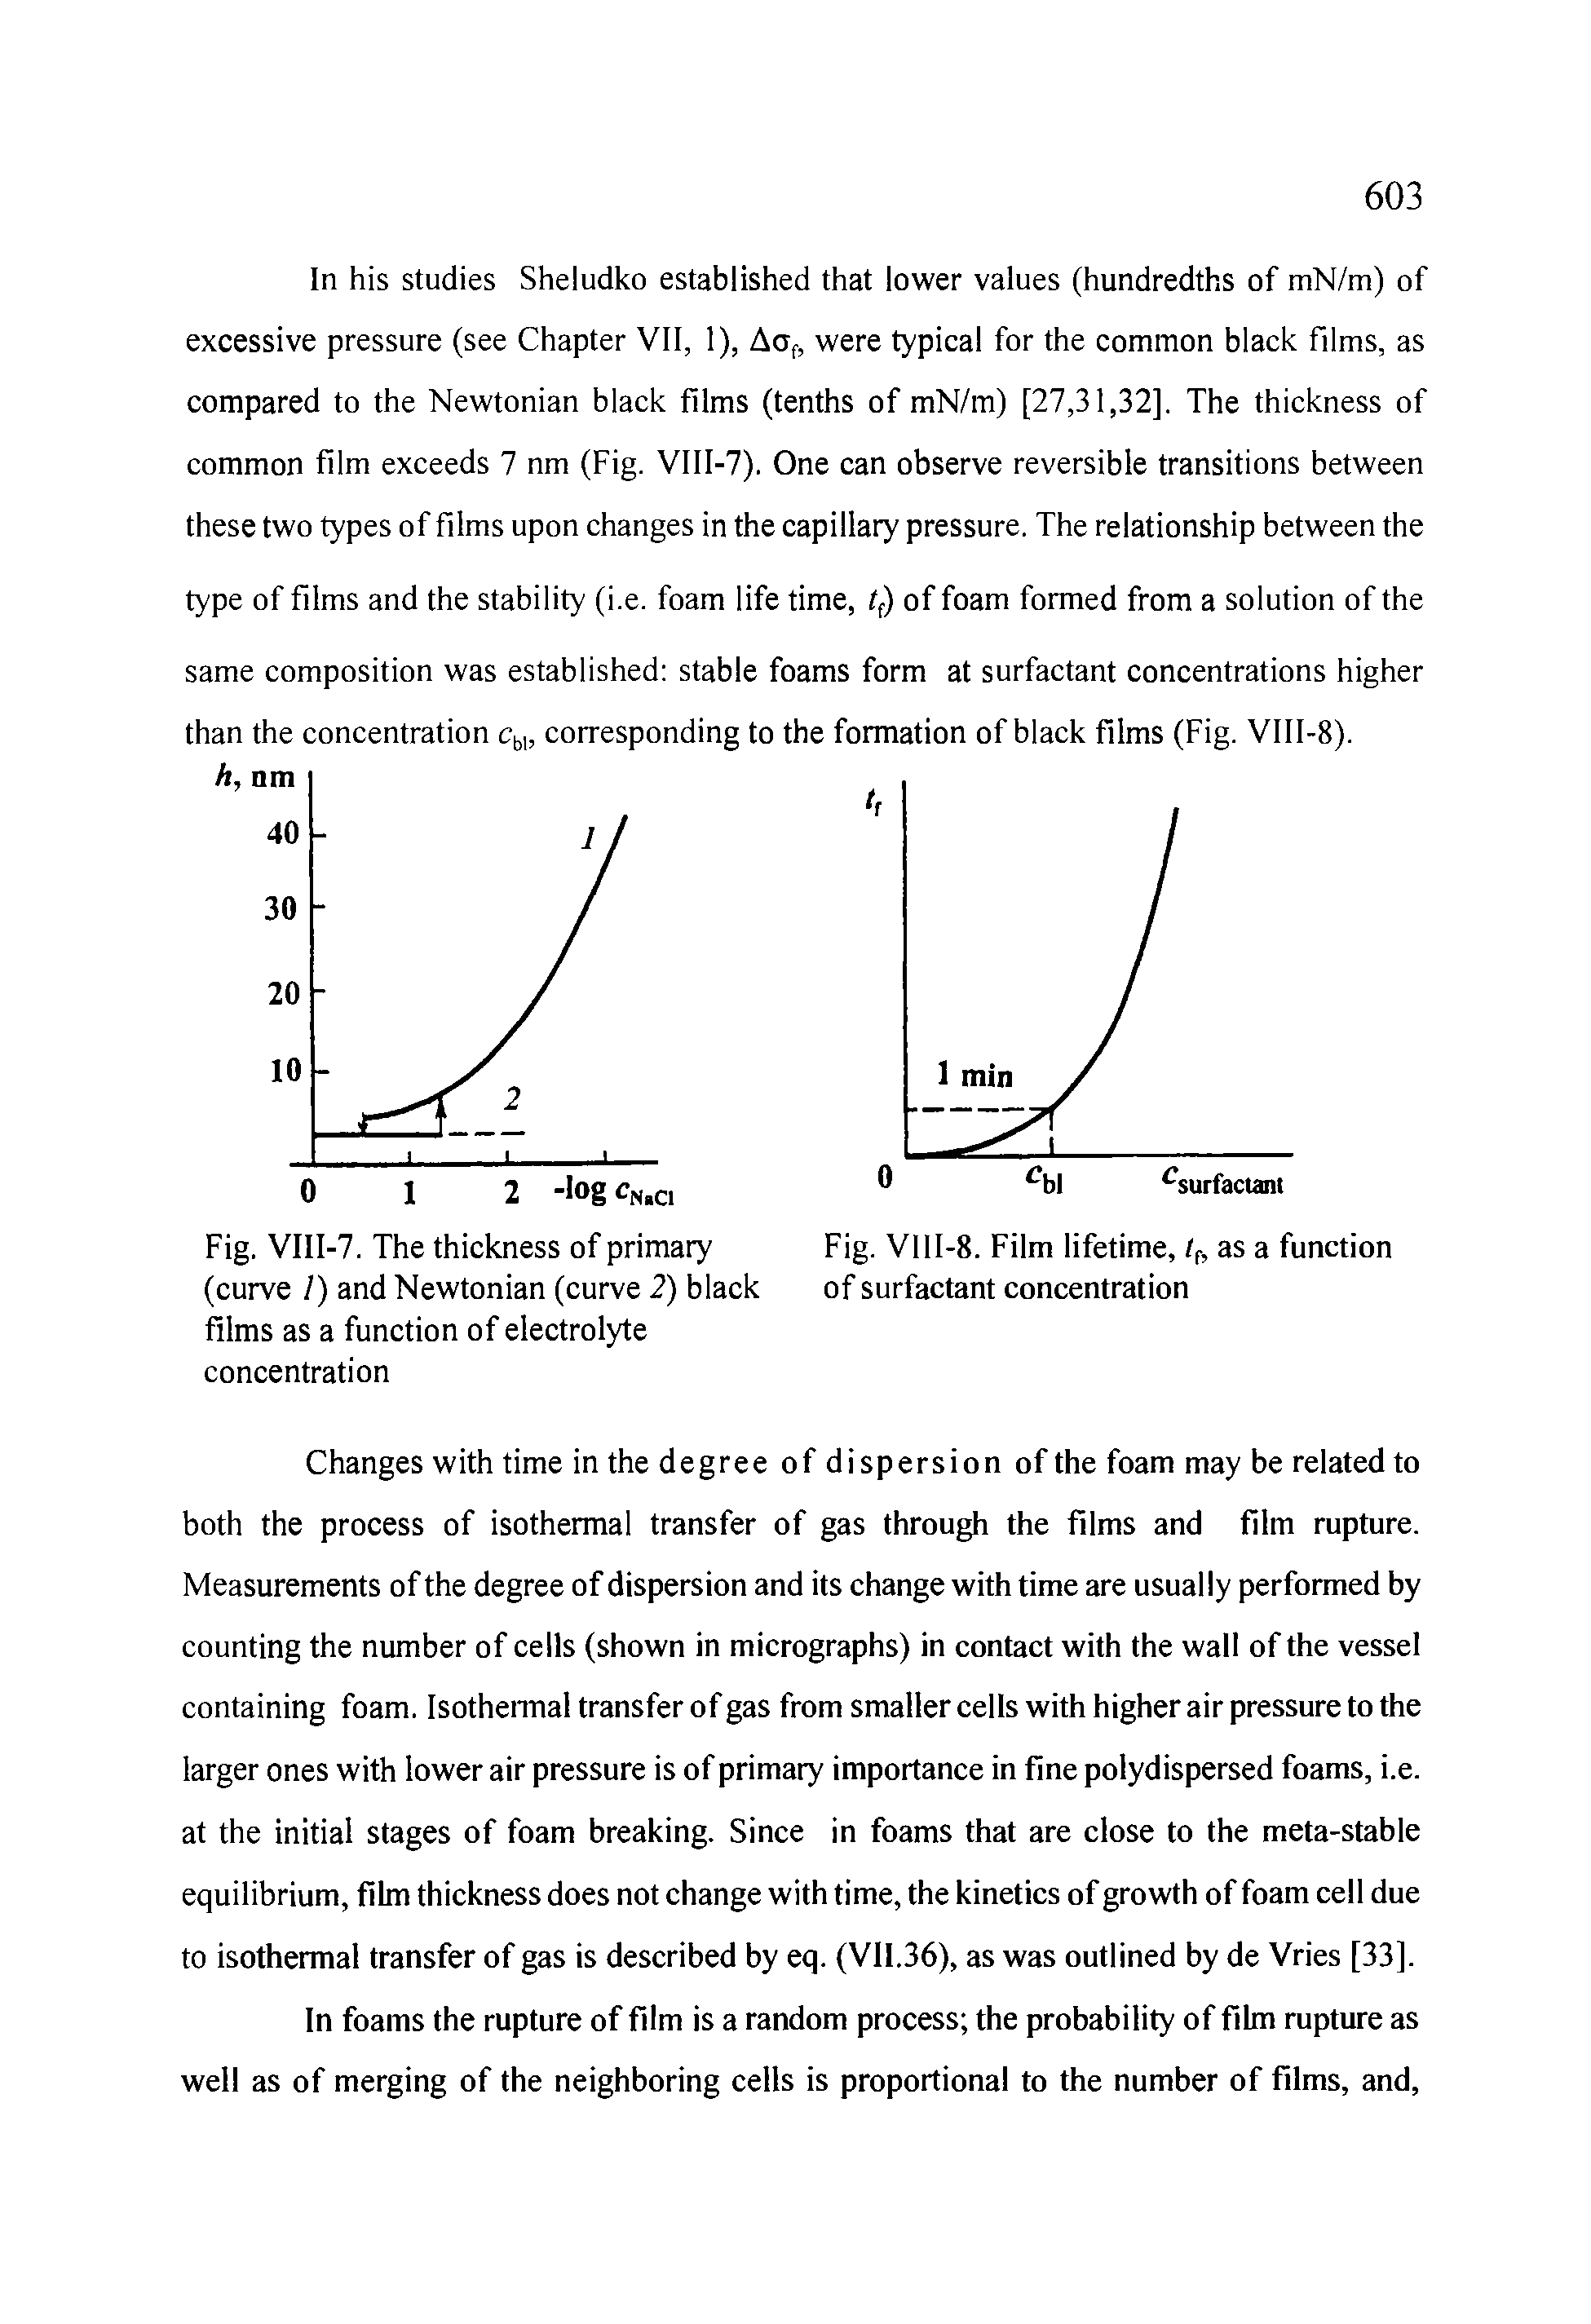 Fig. VIII-7. The thickness of primary Fig. VIII-8. Film lifetime, tf, as a function (curve /) and Newtonian (curve 2) black of surfactant concentration films as a function of electrolyte concentration...